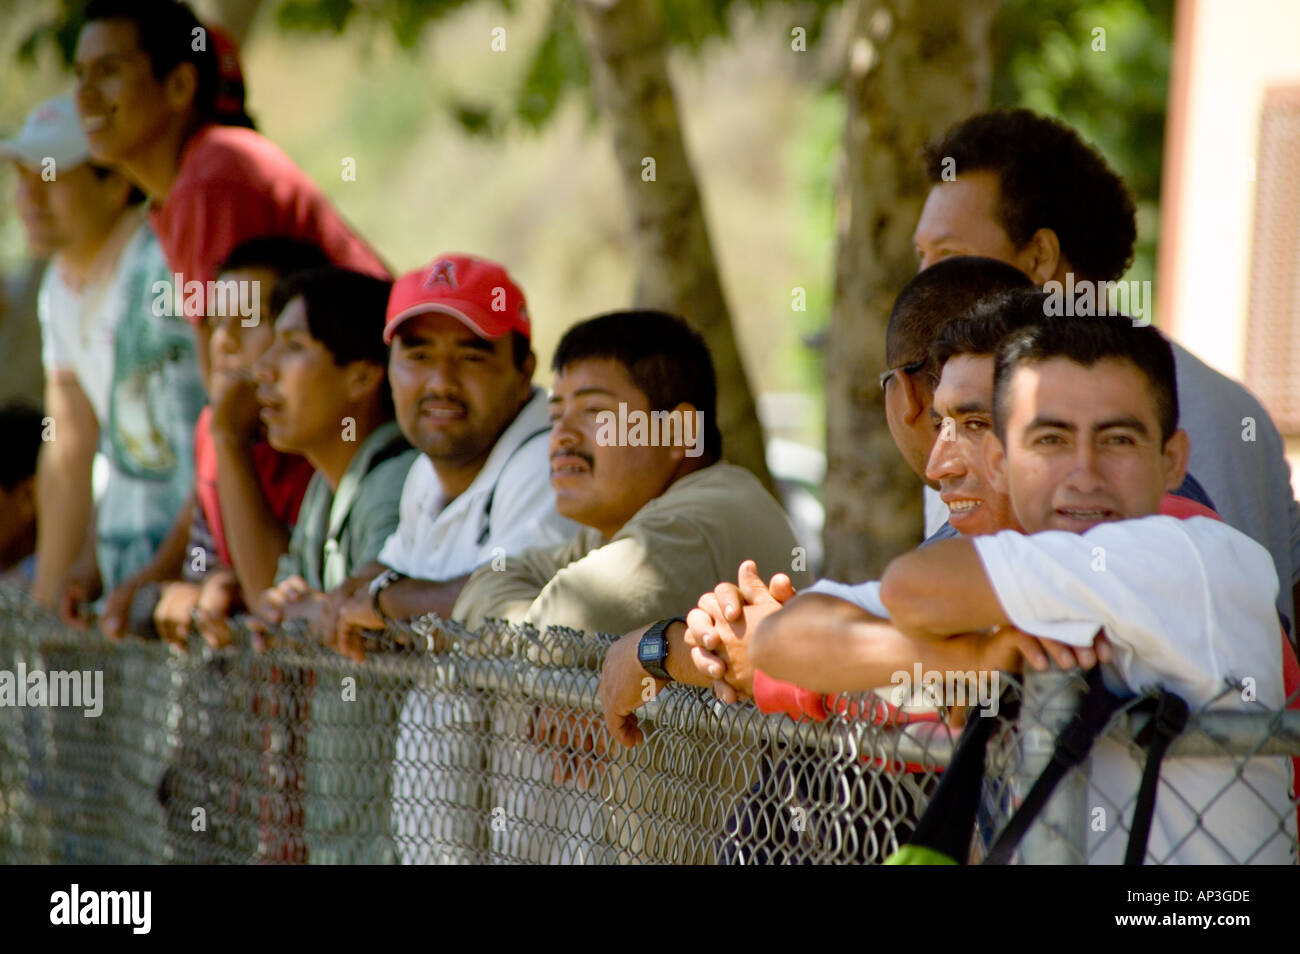 Hispanic day laborers watch a rally in their favor at a hiring site in Laguna Beach, CA. Stock Photo